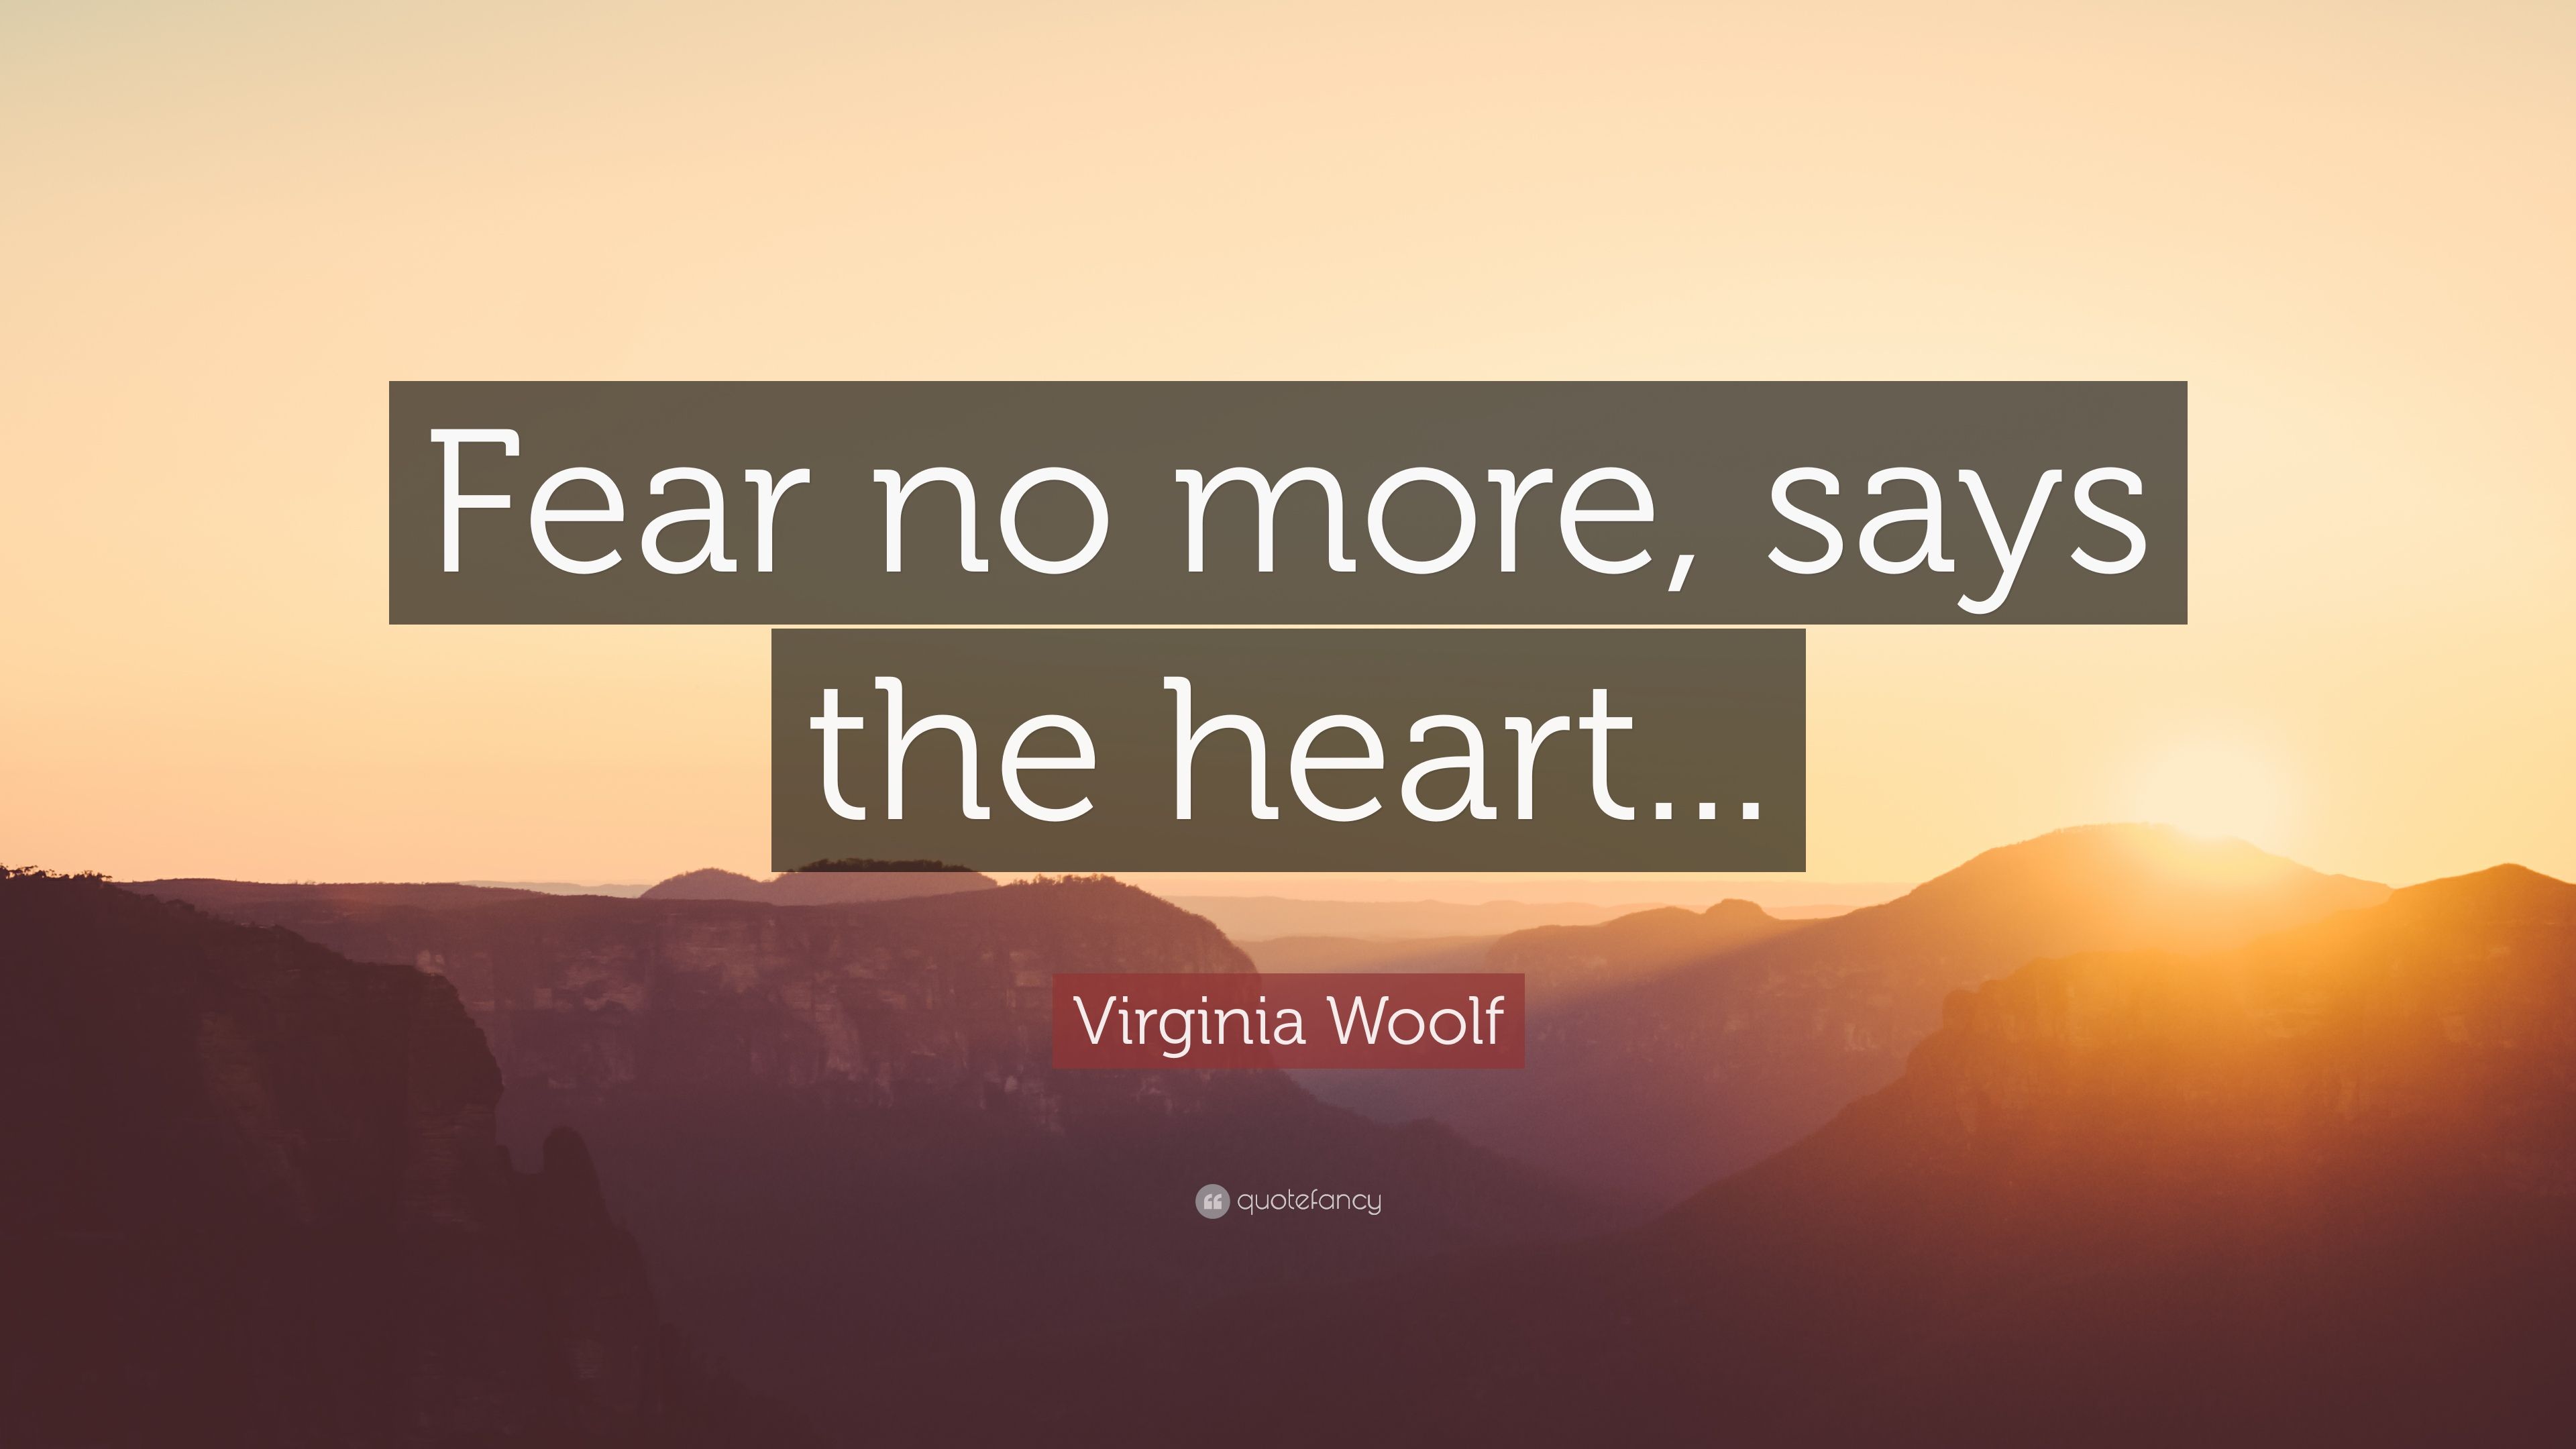 Virginia Woolf Quote: “Fear no more, says the heart.” 12